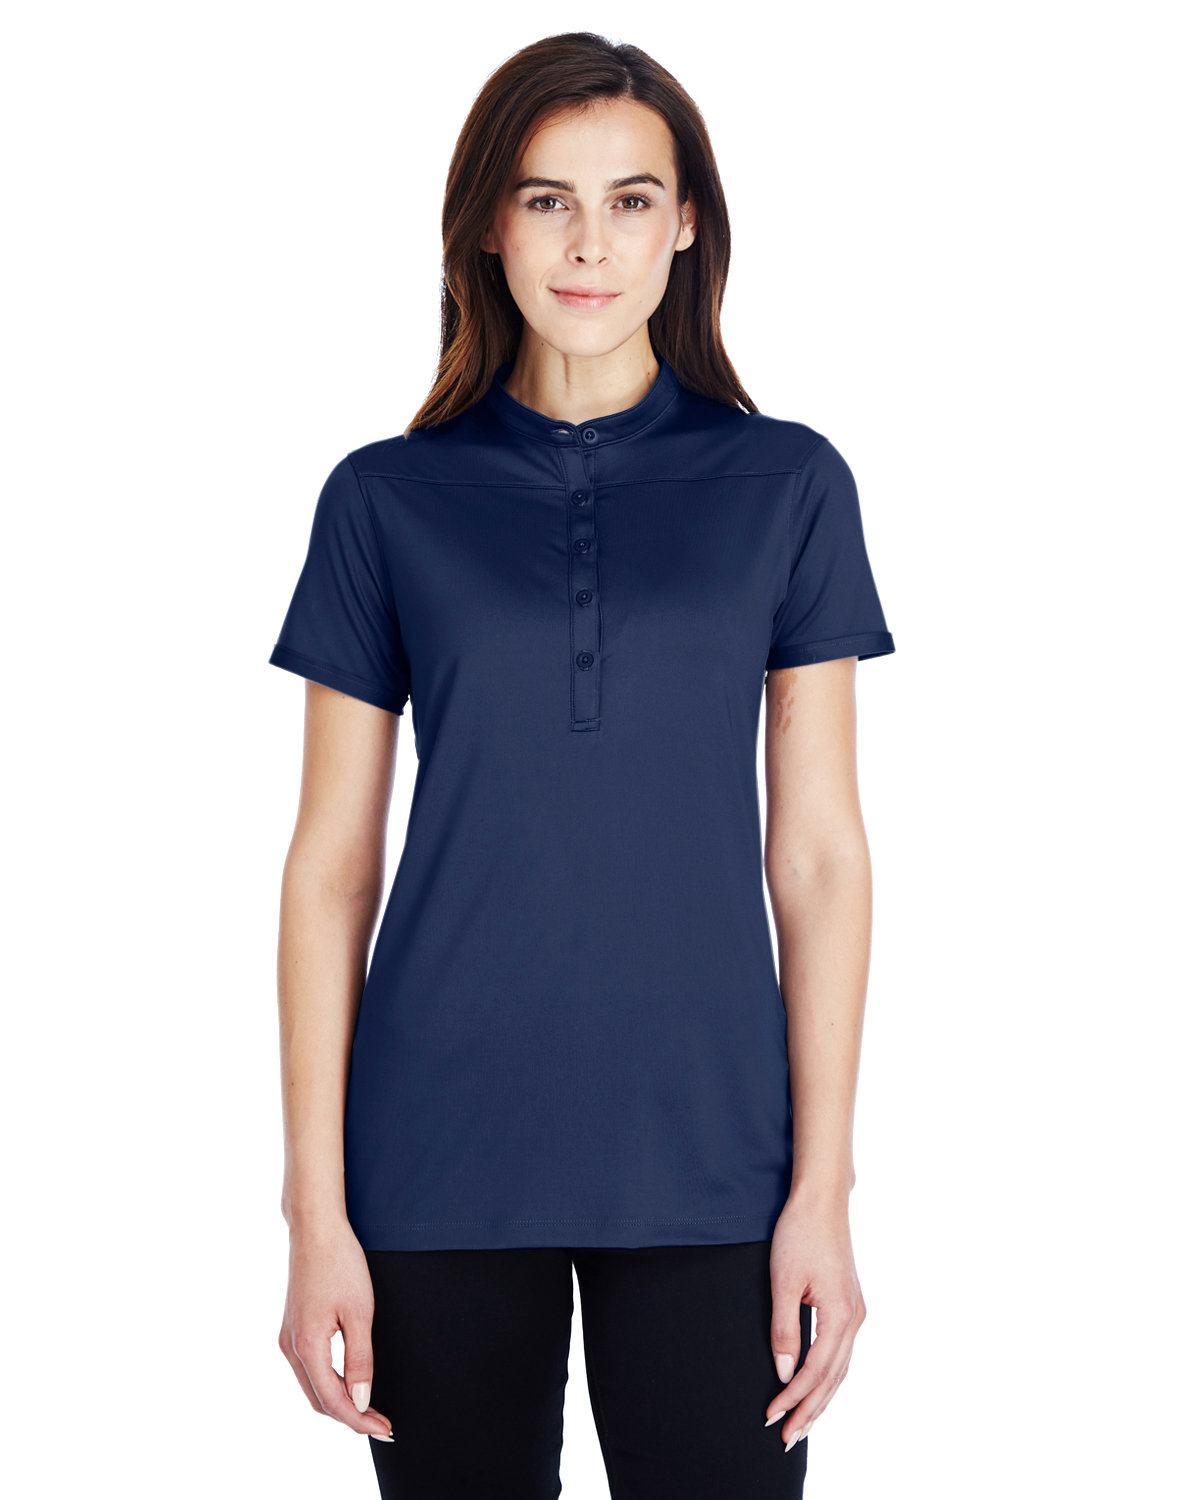 Ladies Corporate Performance Polo 2.0-Under Armour